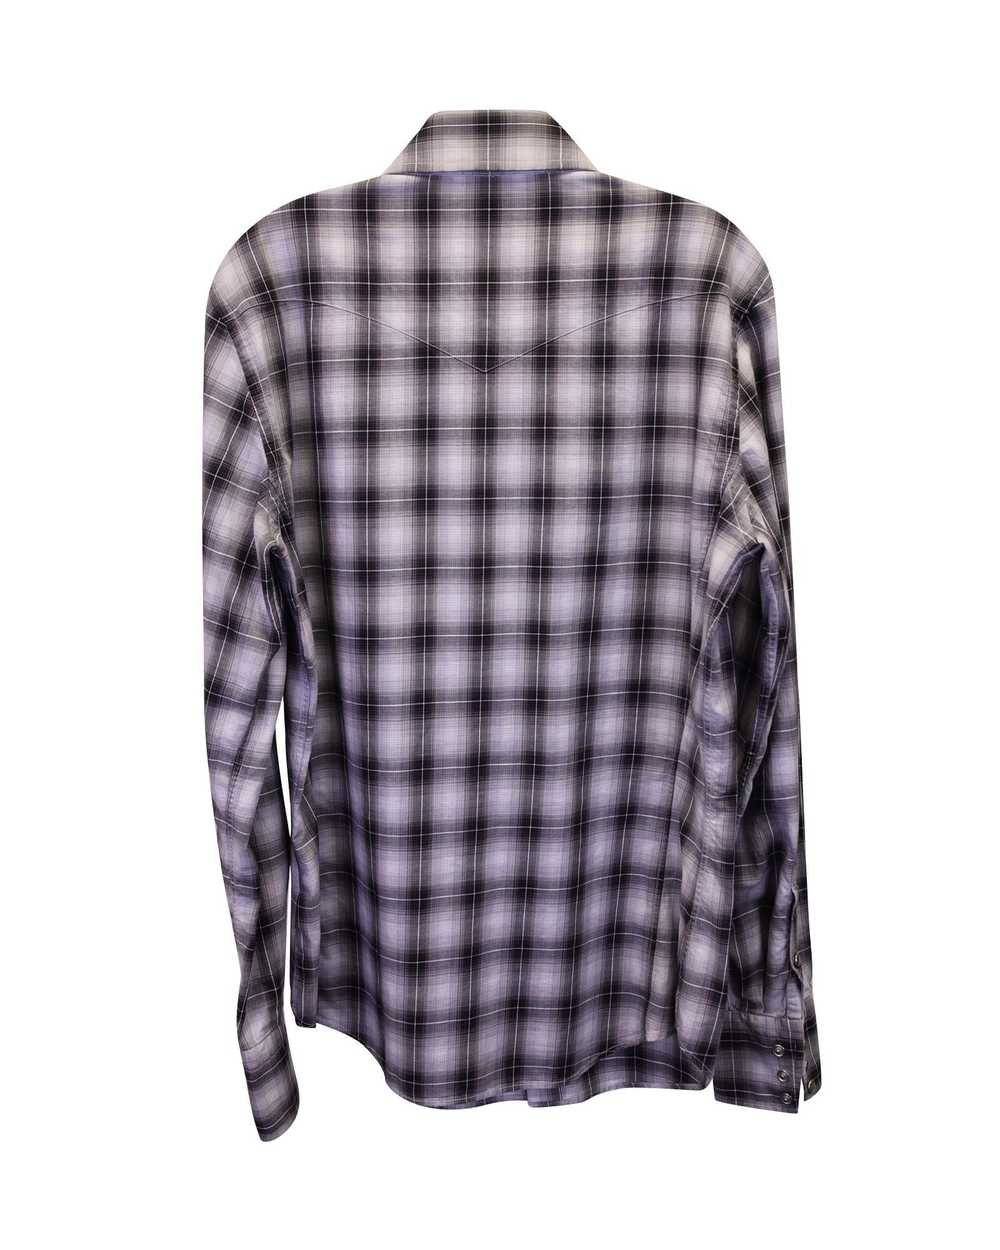 Tom Ford Plaid Western-Style Button-Up Shirt in M… - image 3